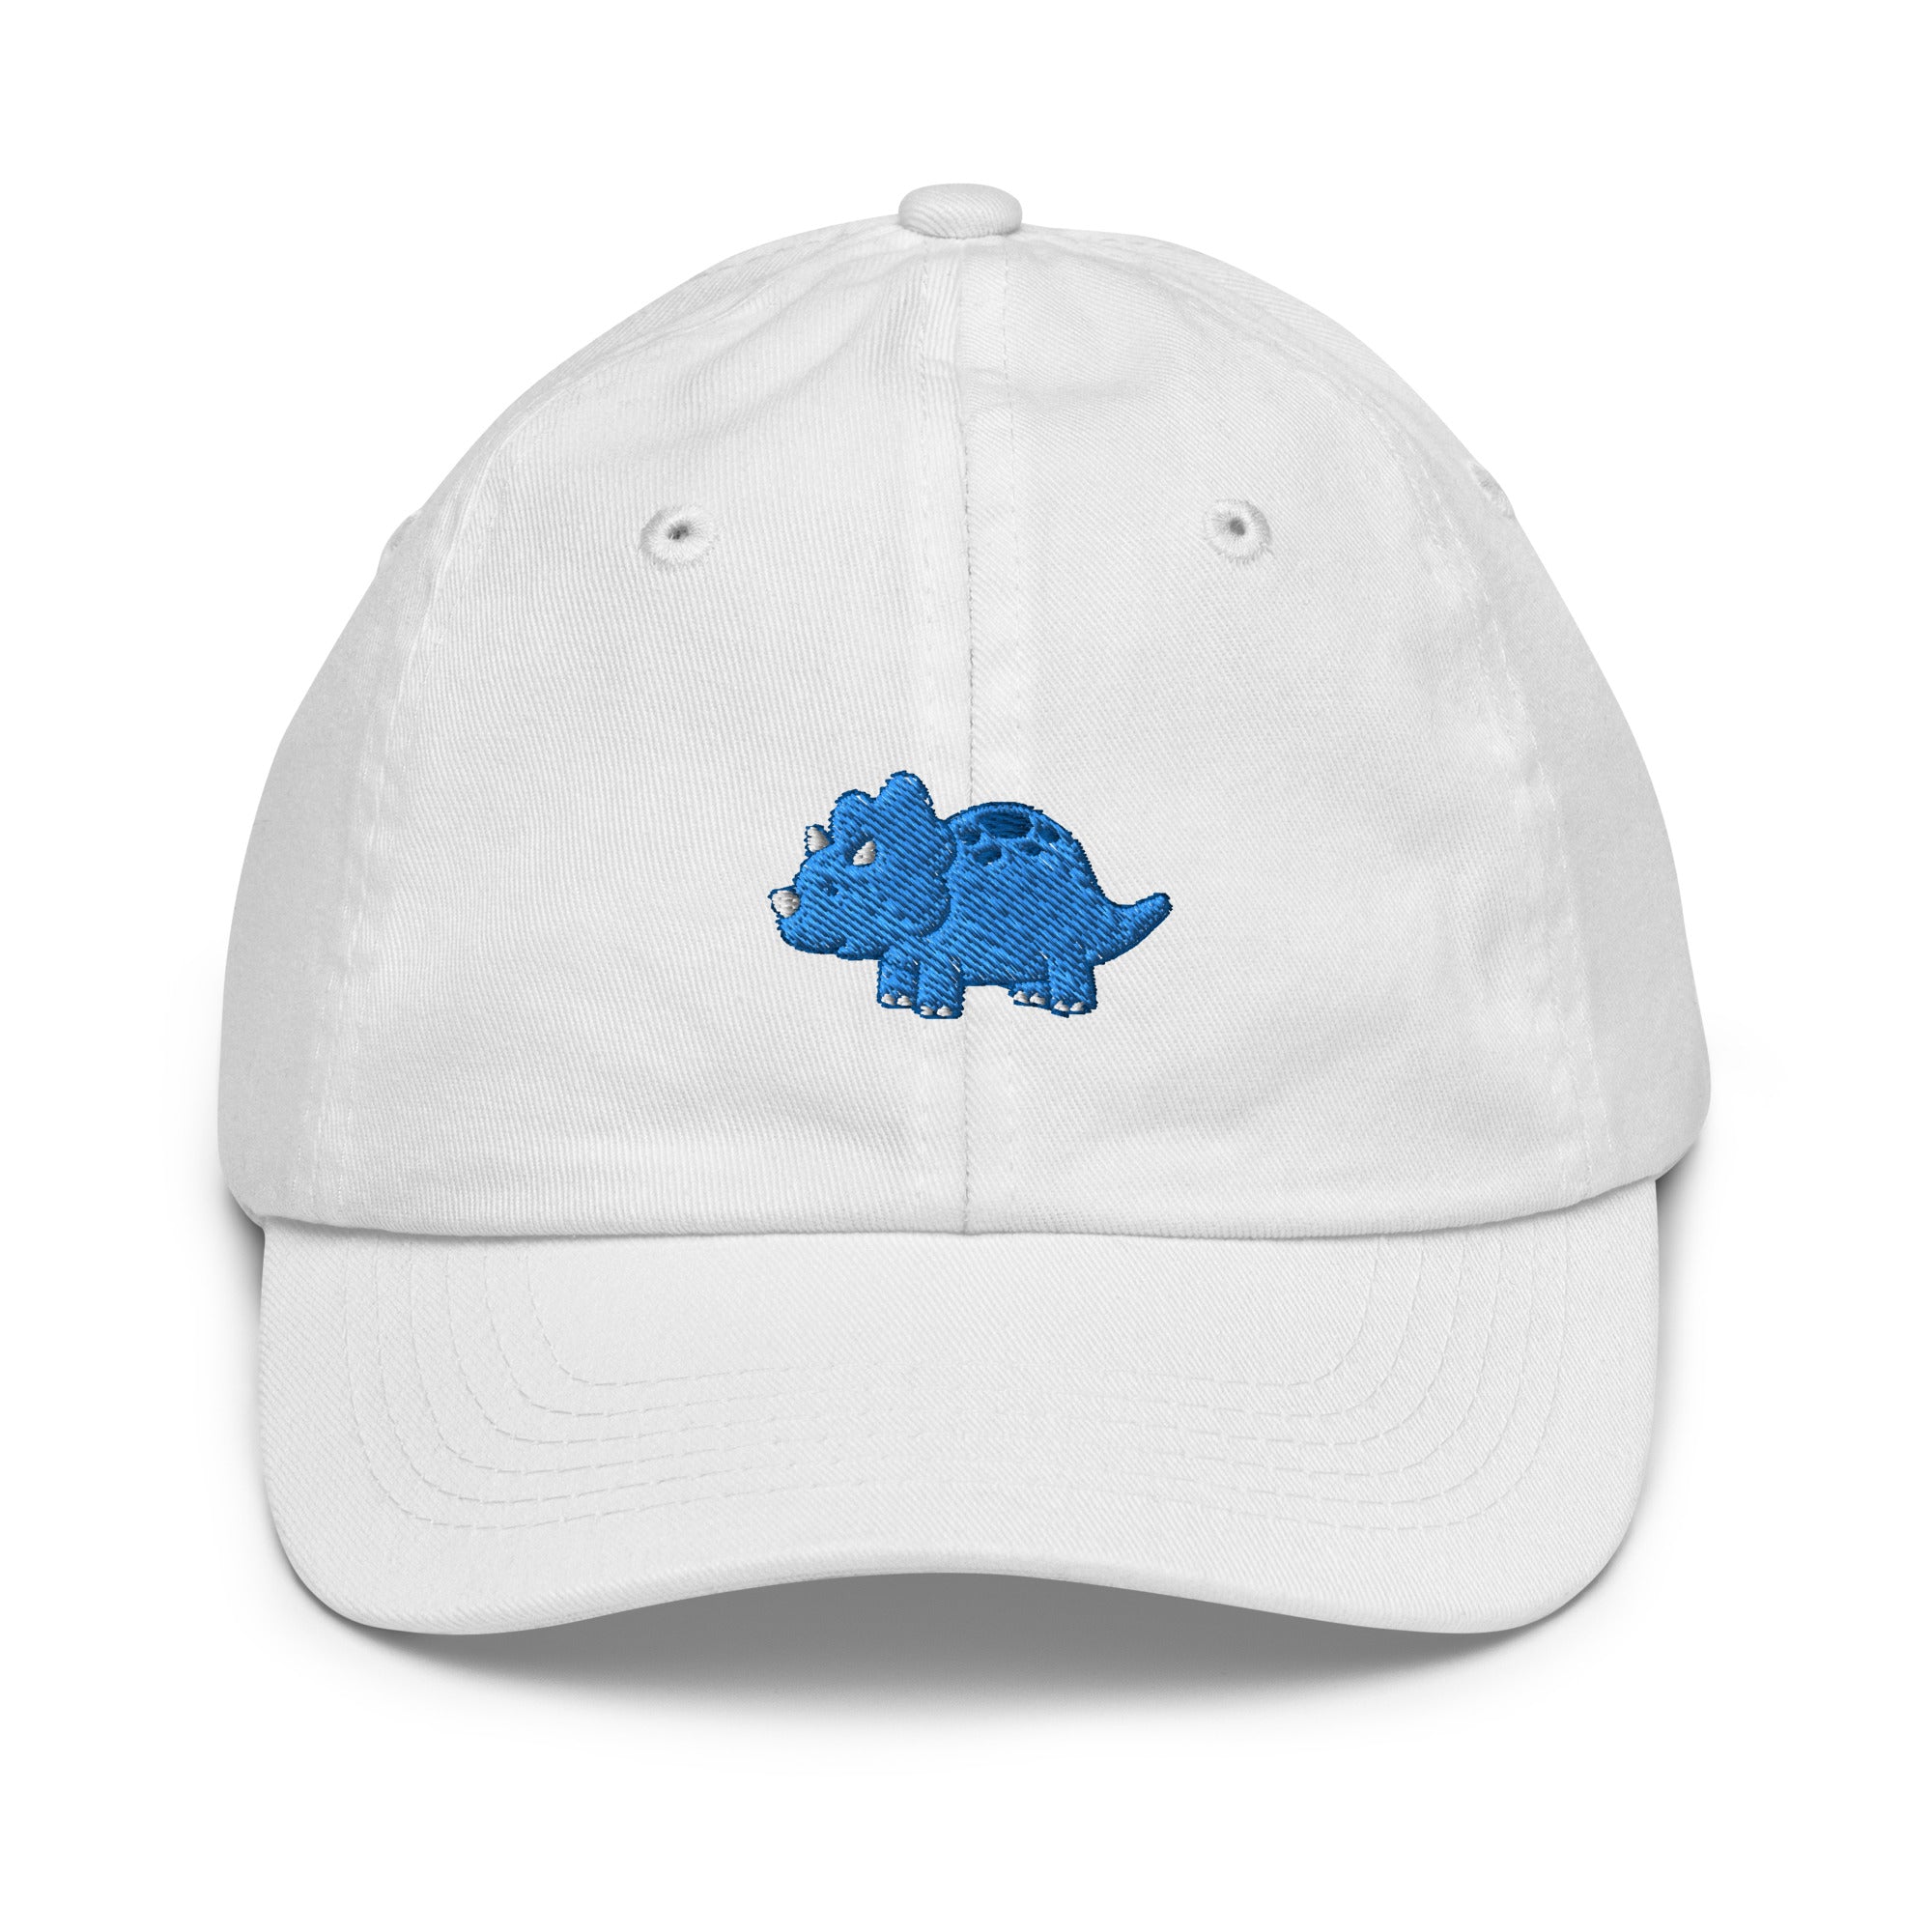 Kids hat with a cute dinosaur